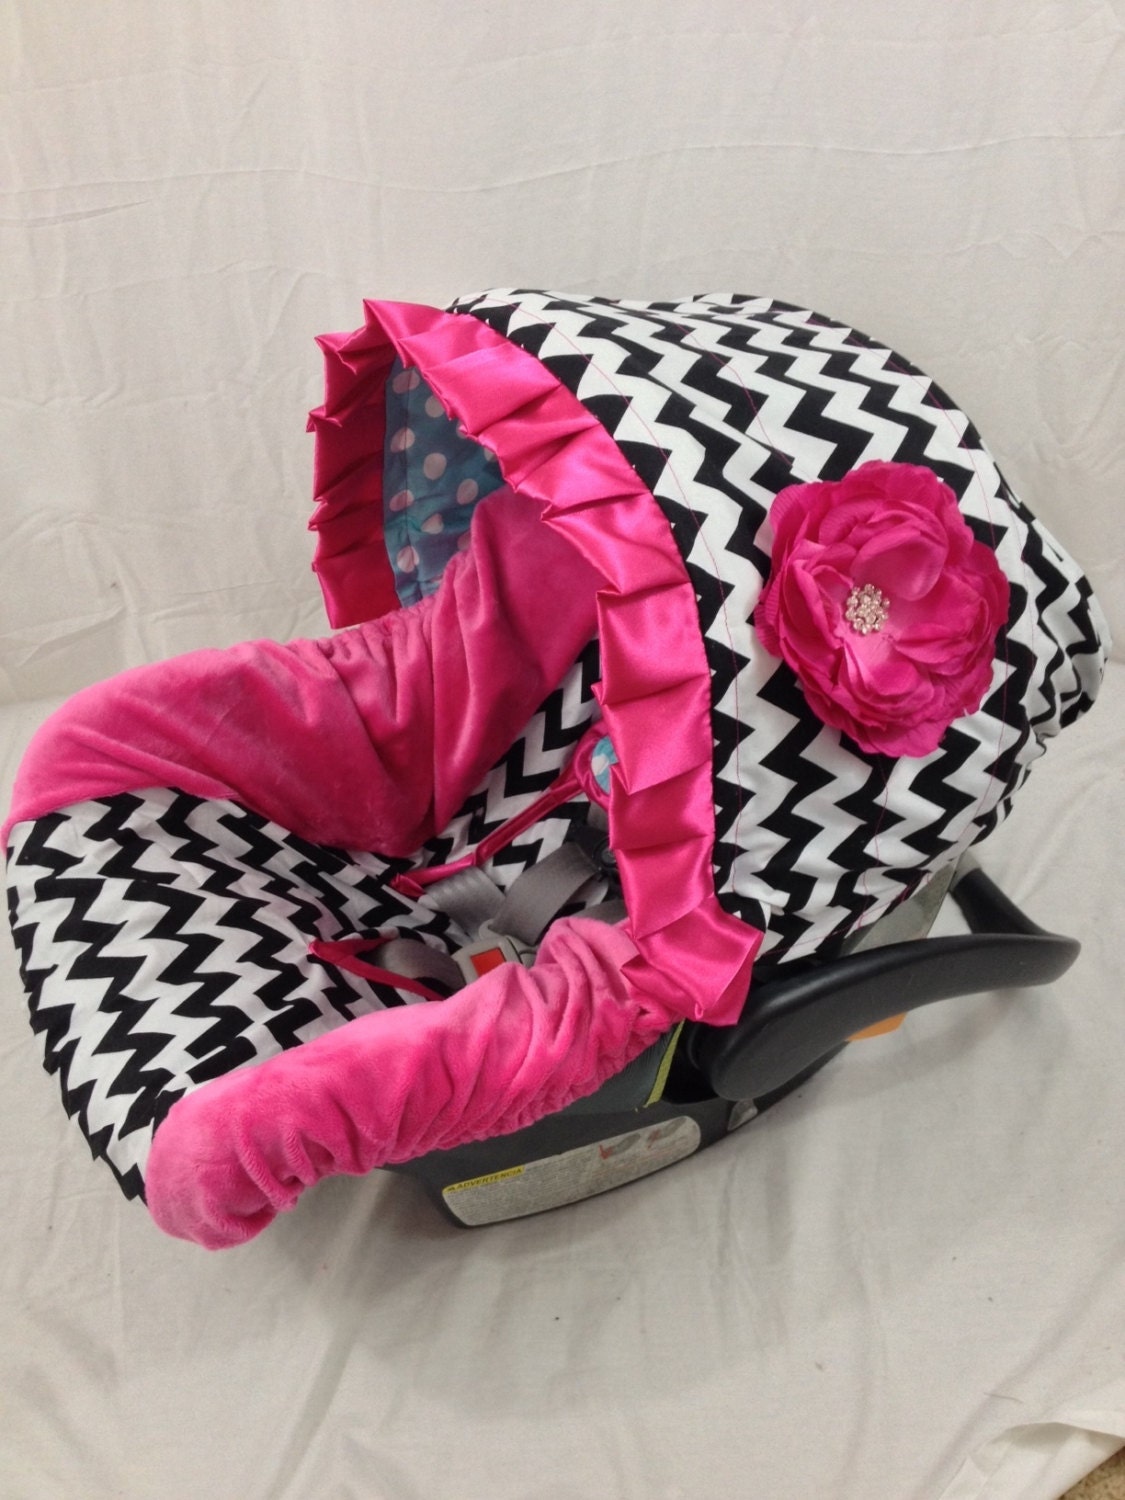 Infant Car Seat Cover Baby Car Seat Cover including matching